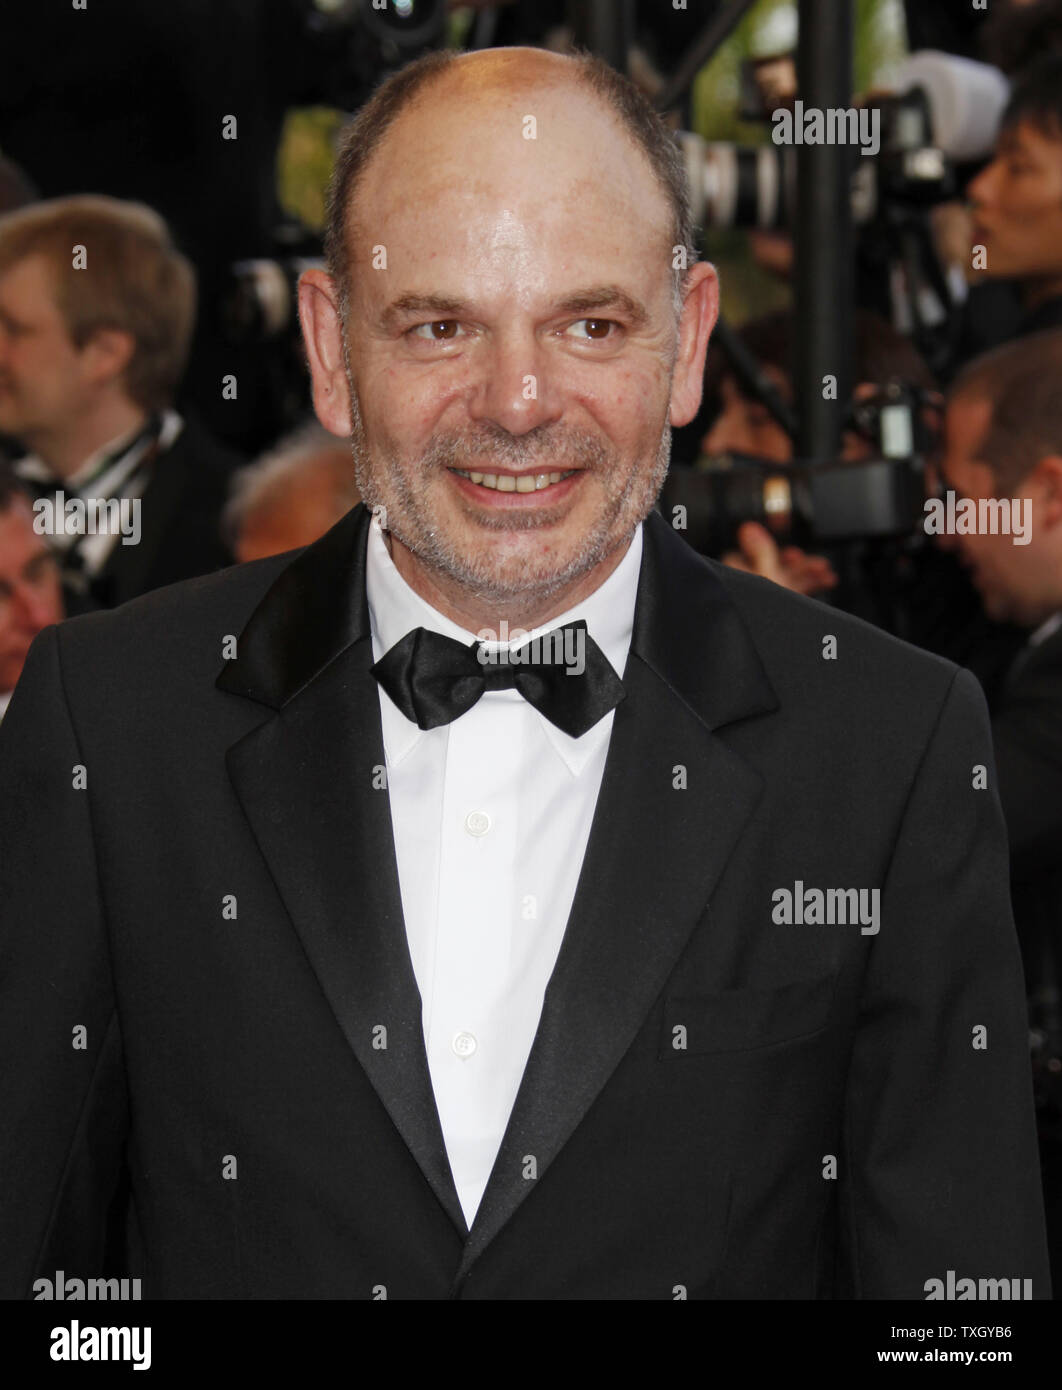 Actor Jean-Pierre Darroussin arrives on the red carpet before a screening of the film 'Up' at the opening of the 62nd annual Cannes Film Festival in Cannes, France on May 13, 2009.   (UPI Photo/David Silpa) Stock Photo